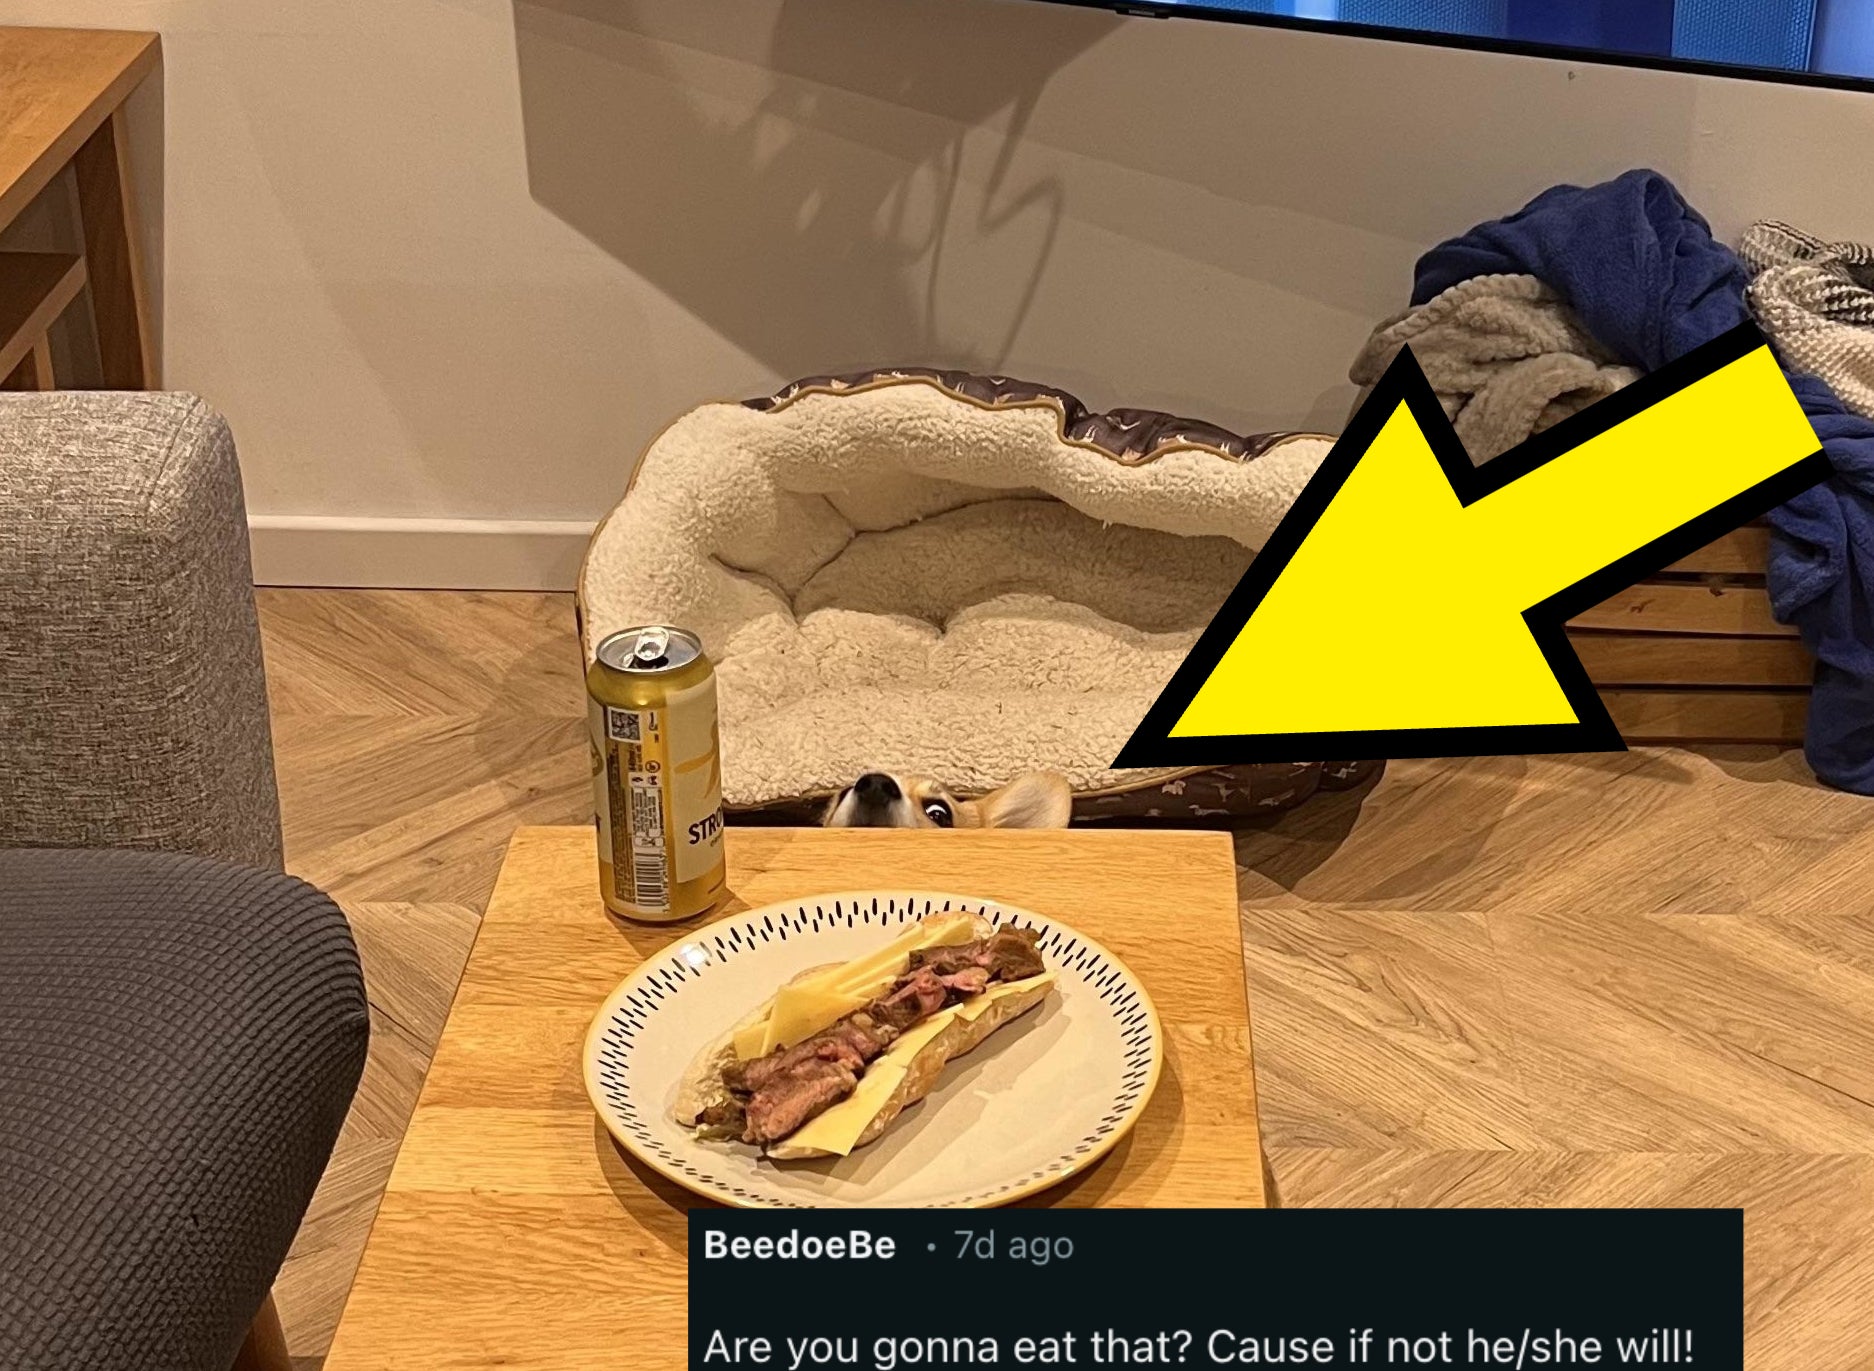 Dog bed, a can of drink, sandwich on table, TV in background showing a person at a counter, and a couch with a blue blanket